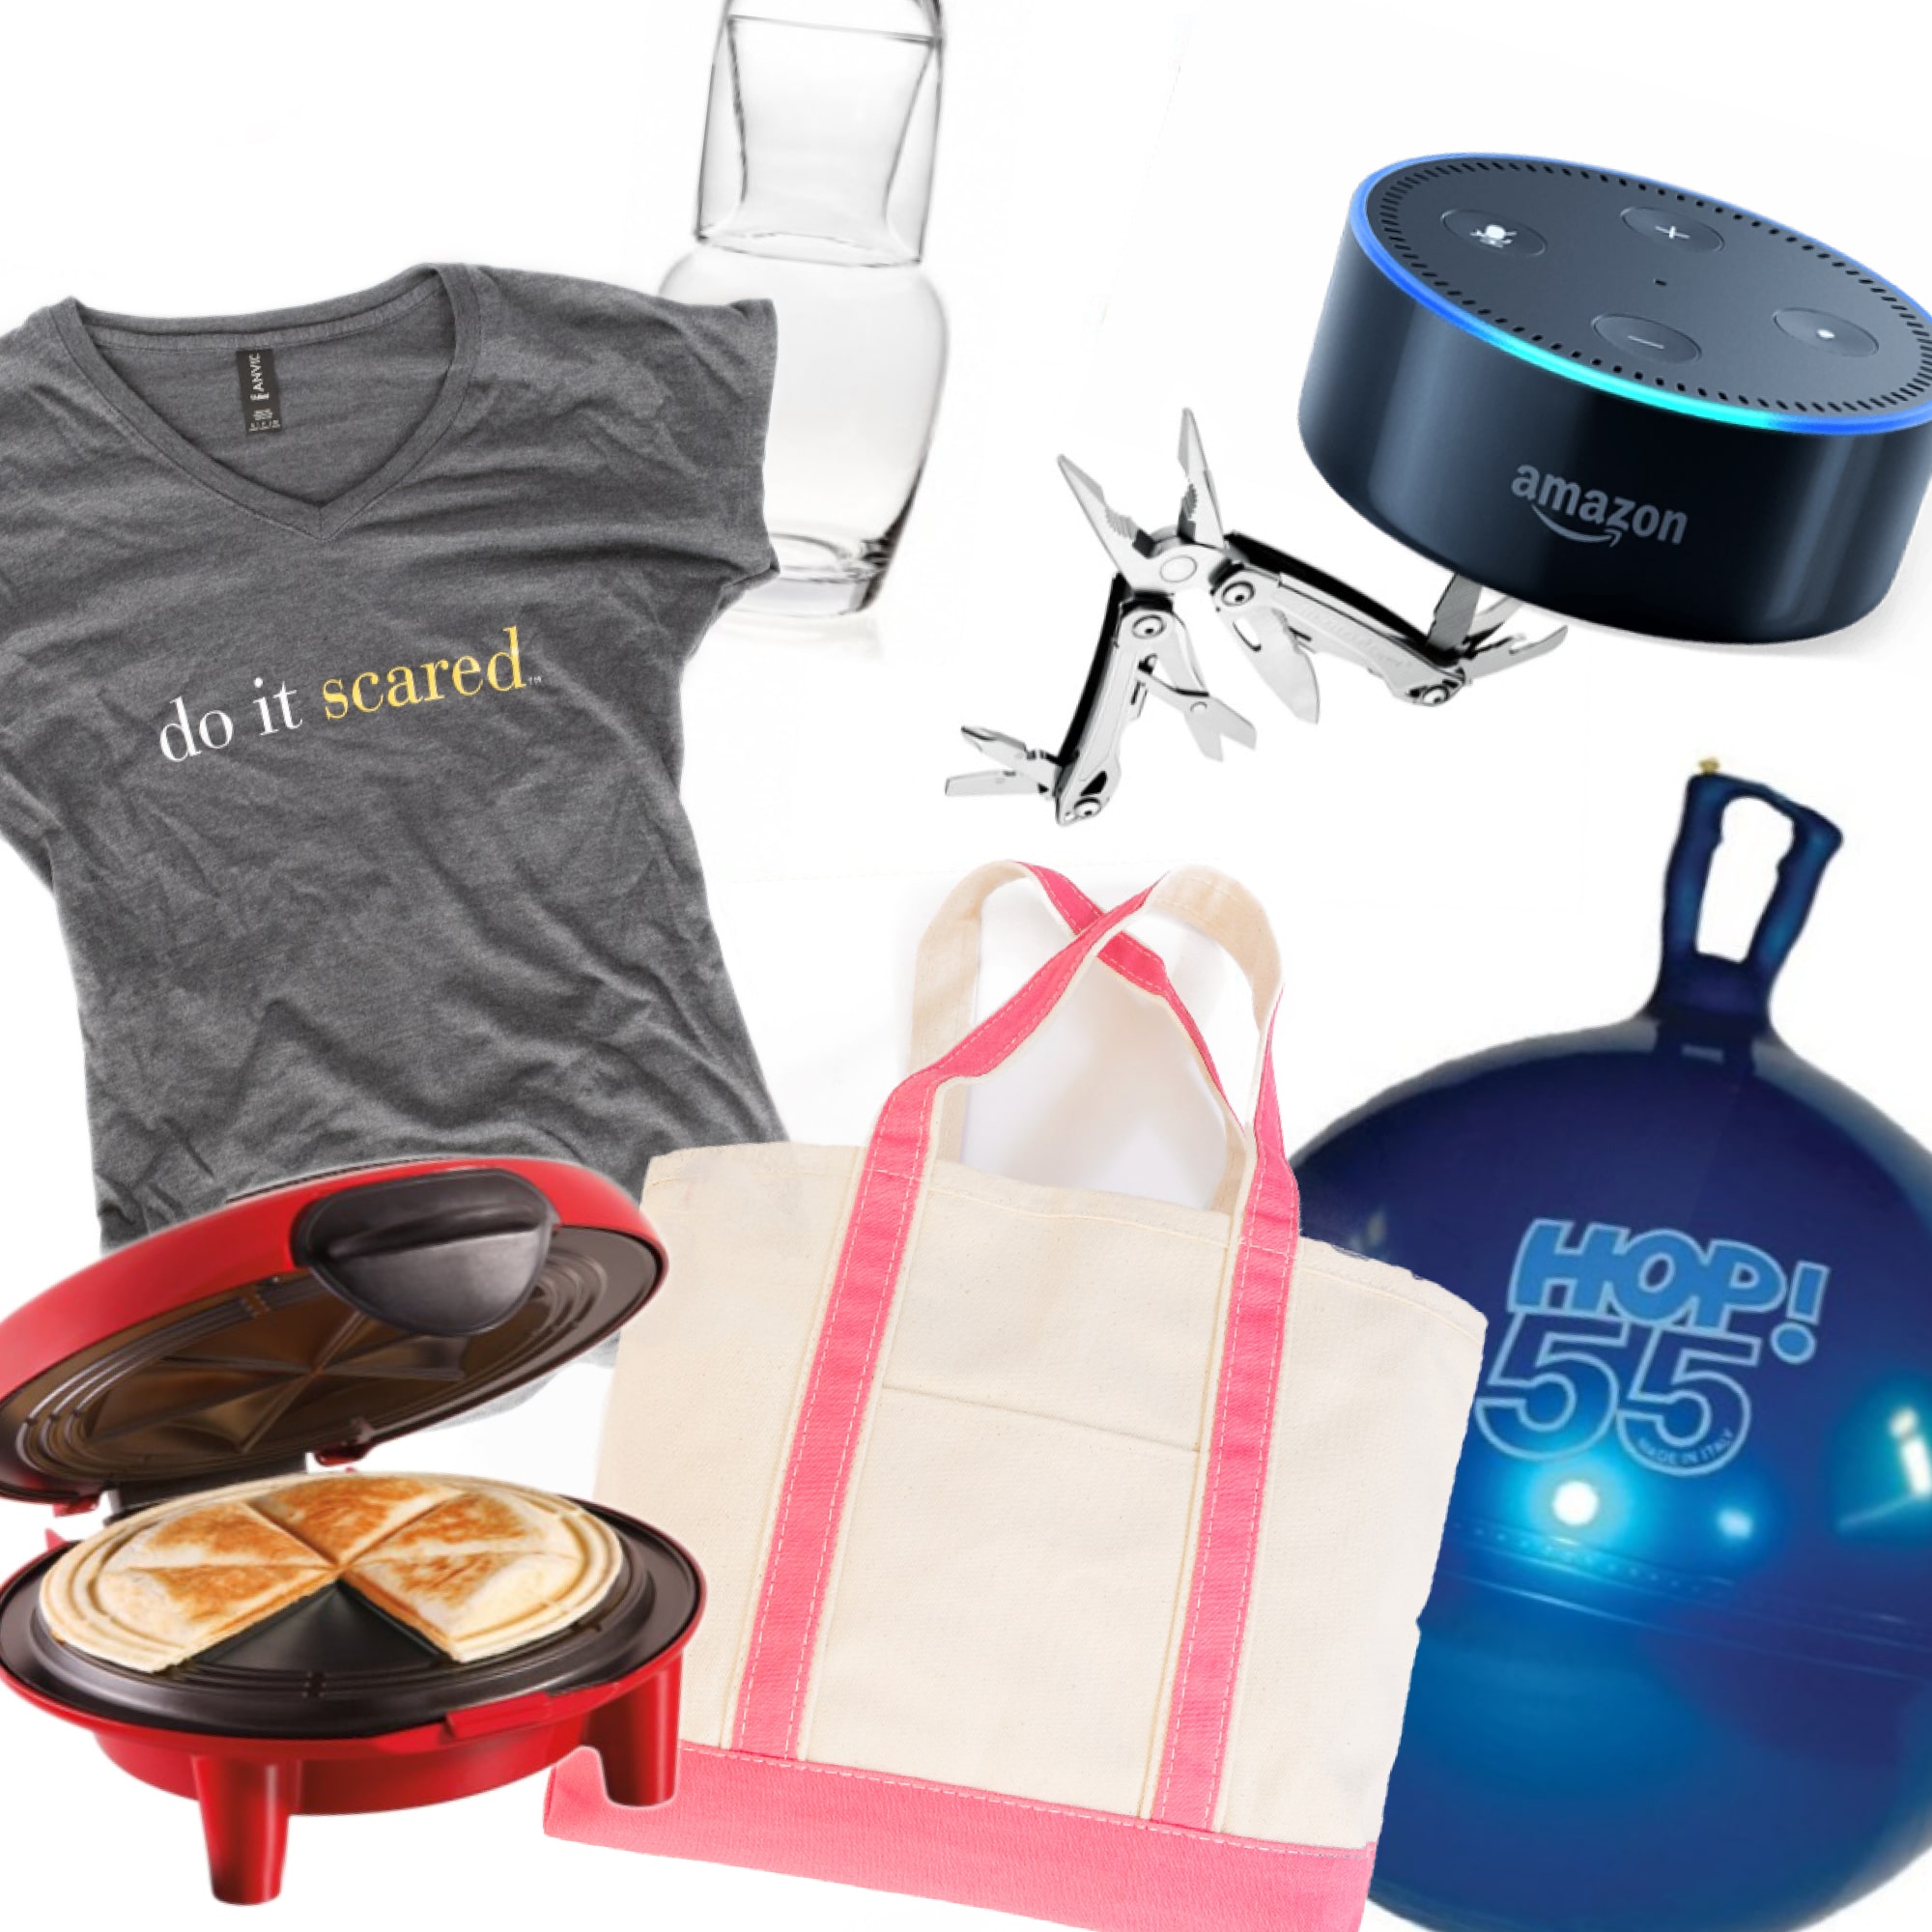 16 thoughtful gifts under $30 for every person on your list